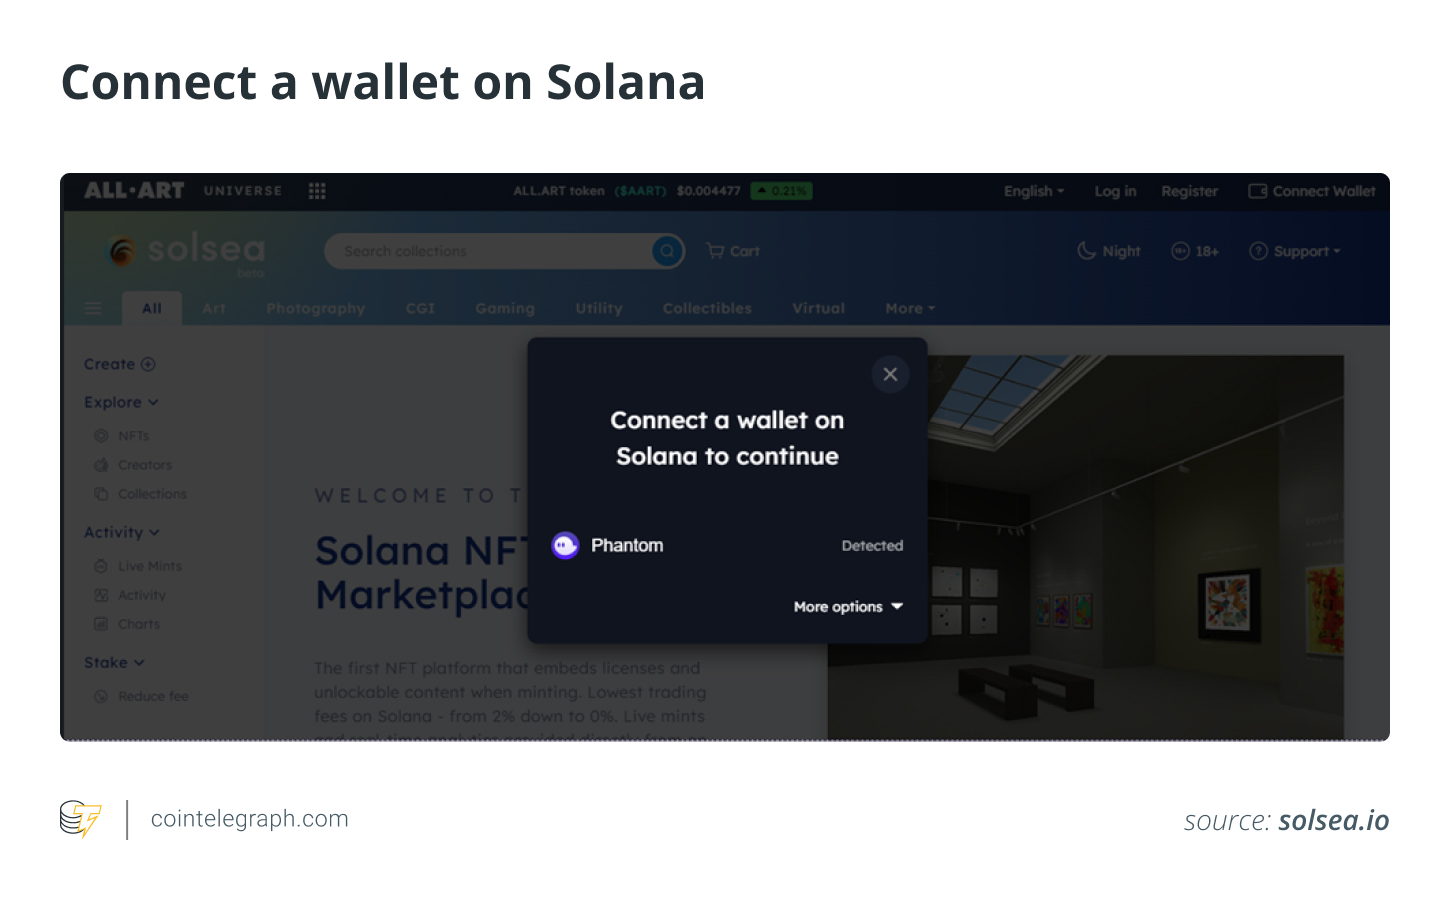 Connect a wallet on Solana